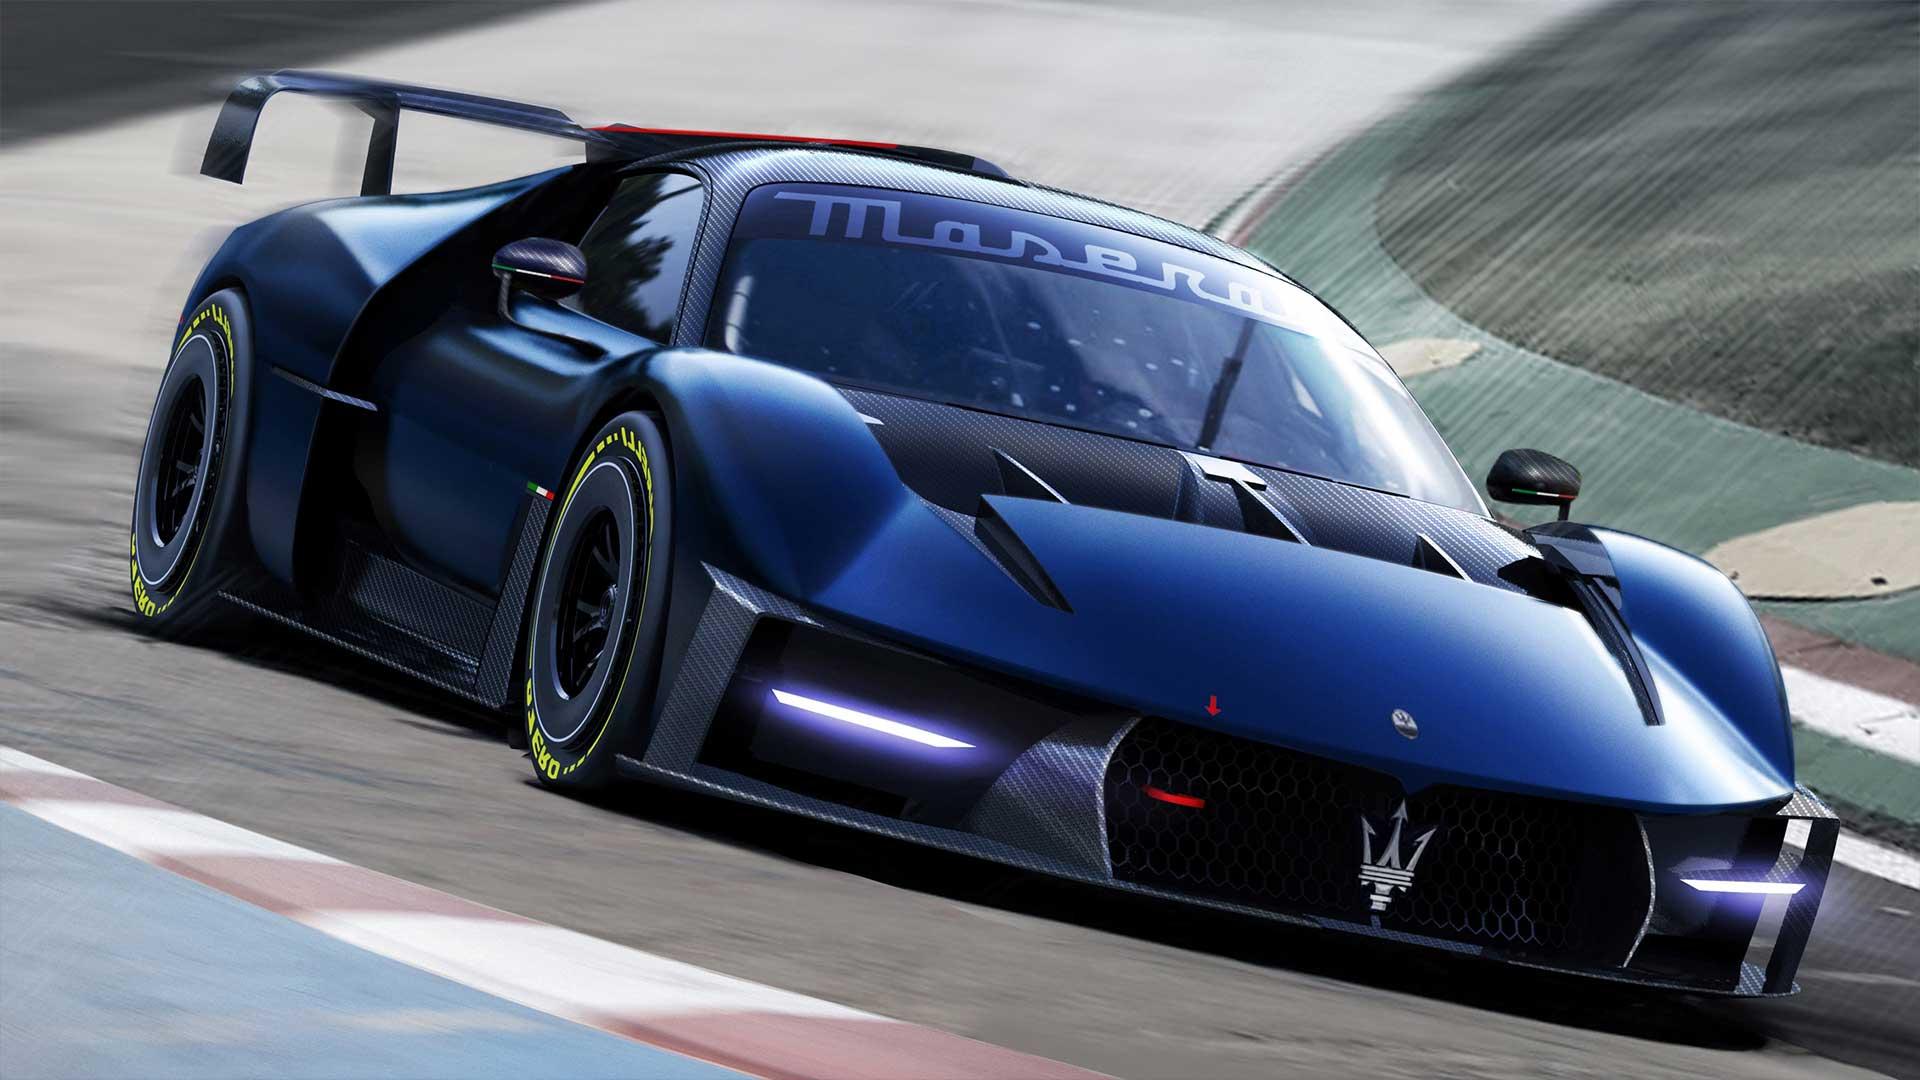 The Maserati Project24 concept driving a car on a track diagonally forward